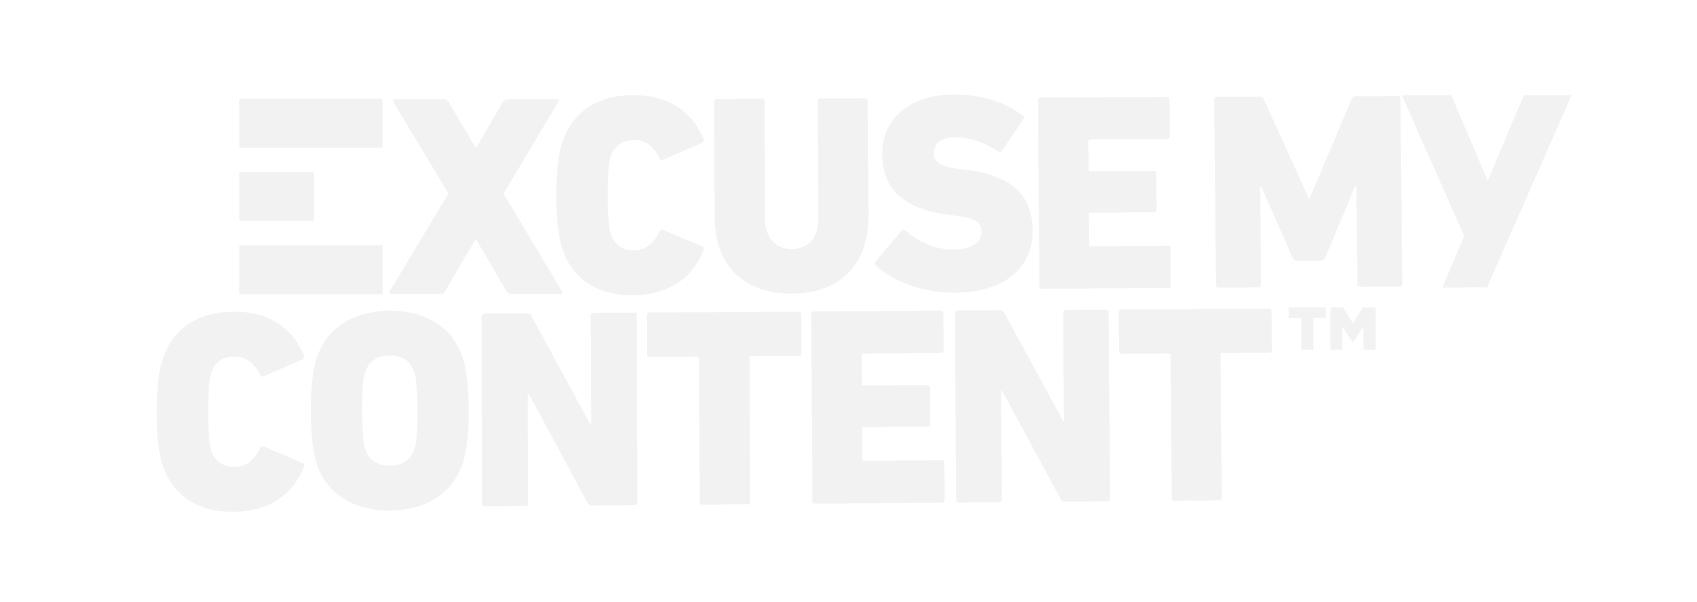 EXCUSE MY CONTENT LOGO 2B.png